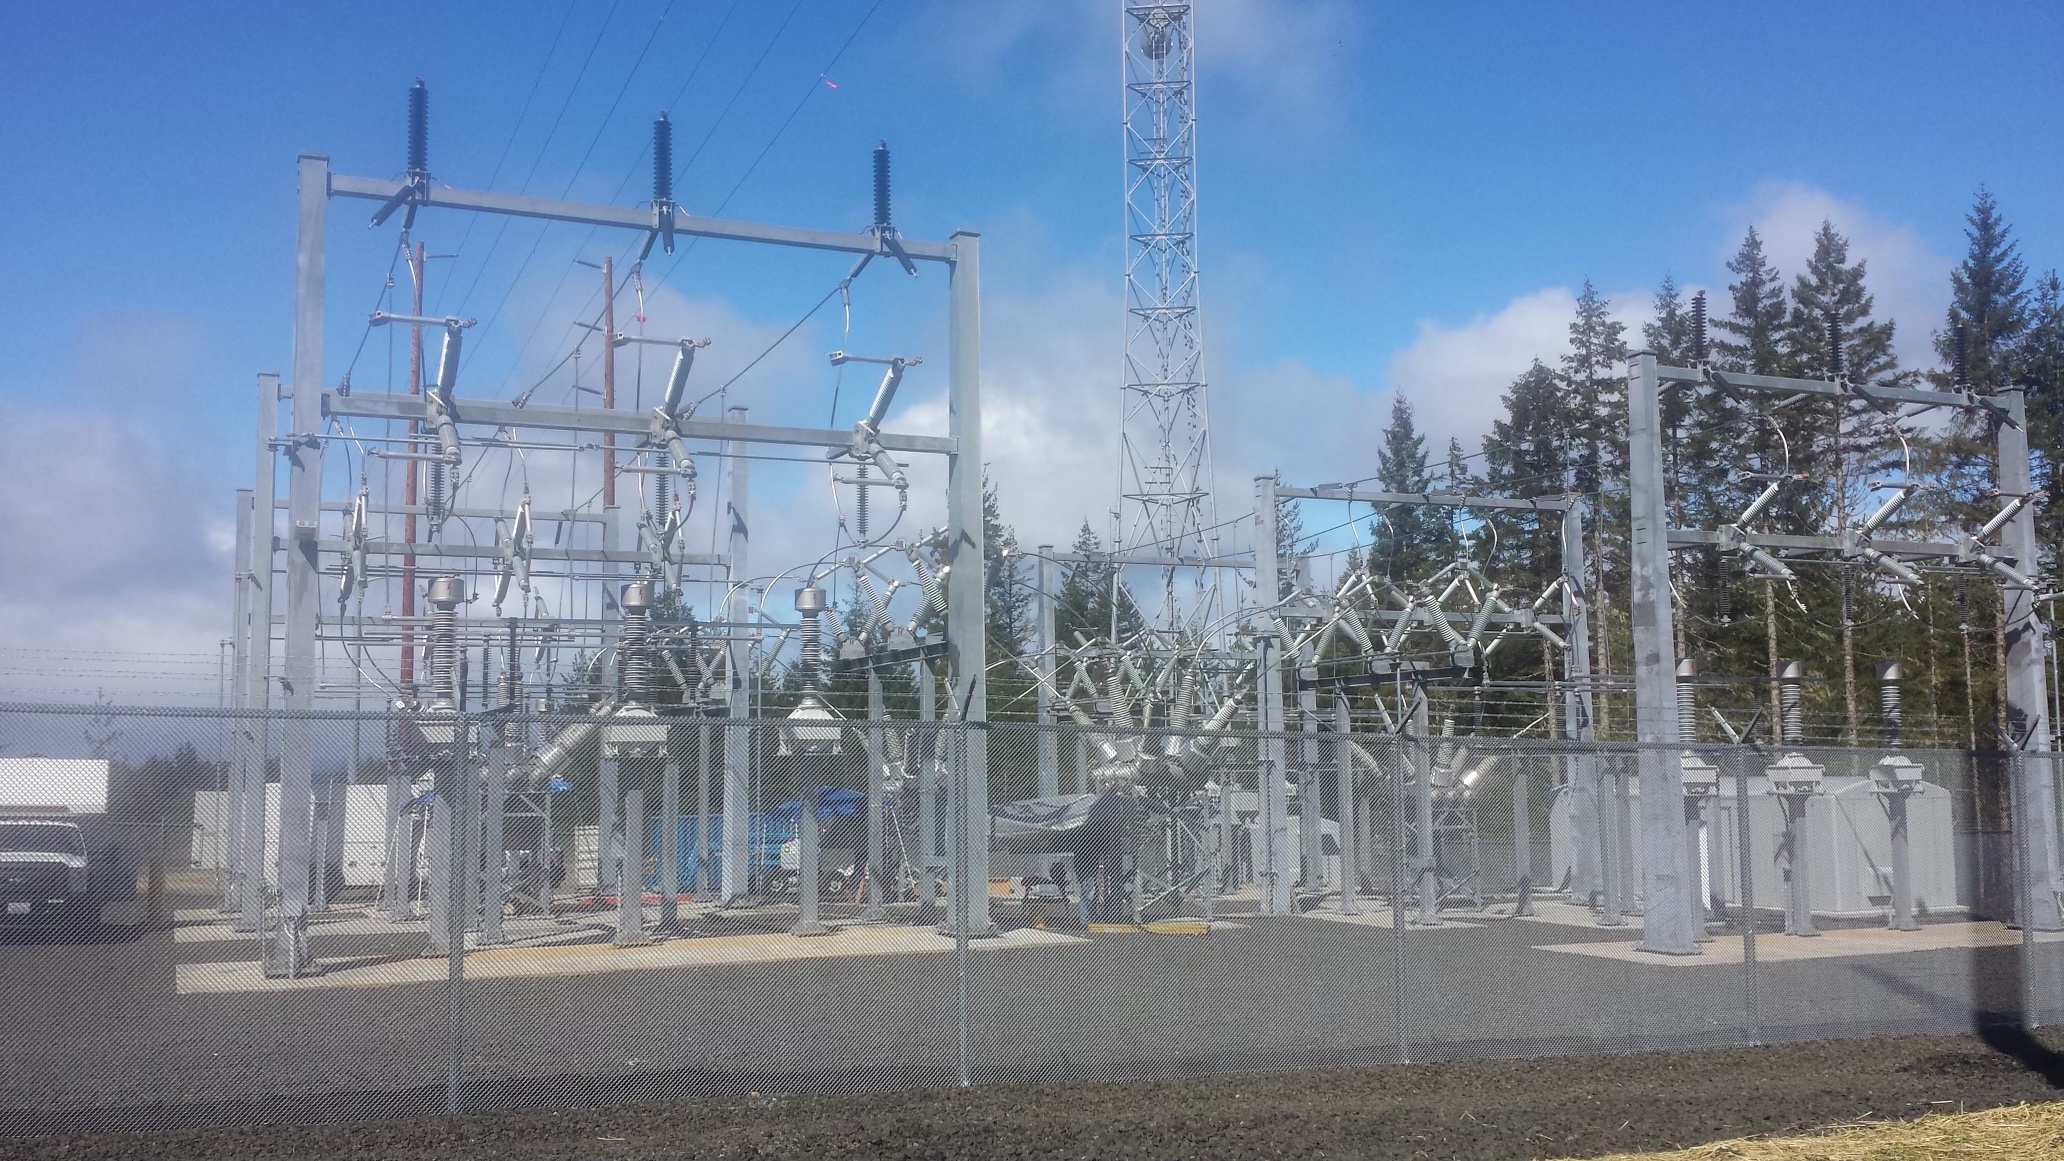 The substation impacted by today's power outage in Pierce County. (Courtesy: Tacoma Power Staff)